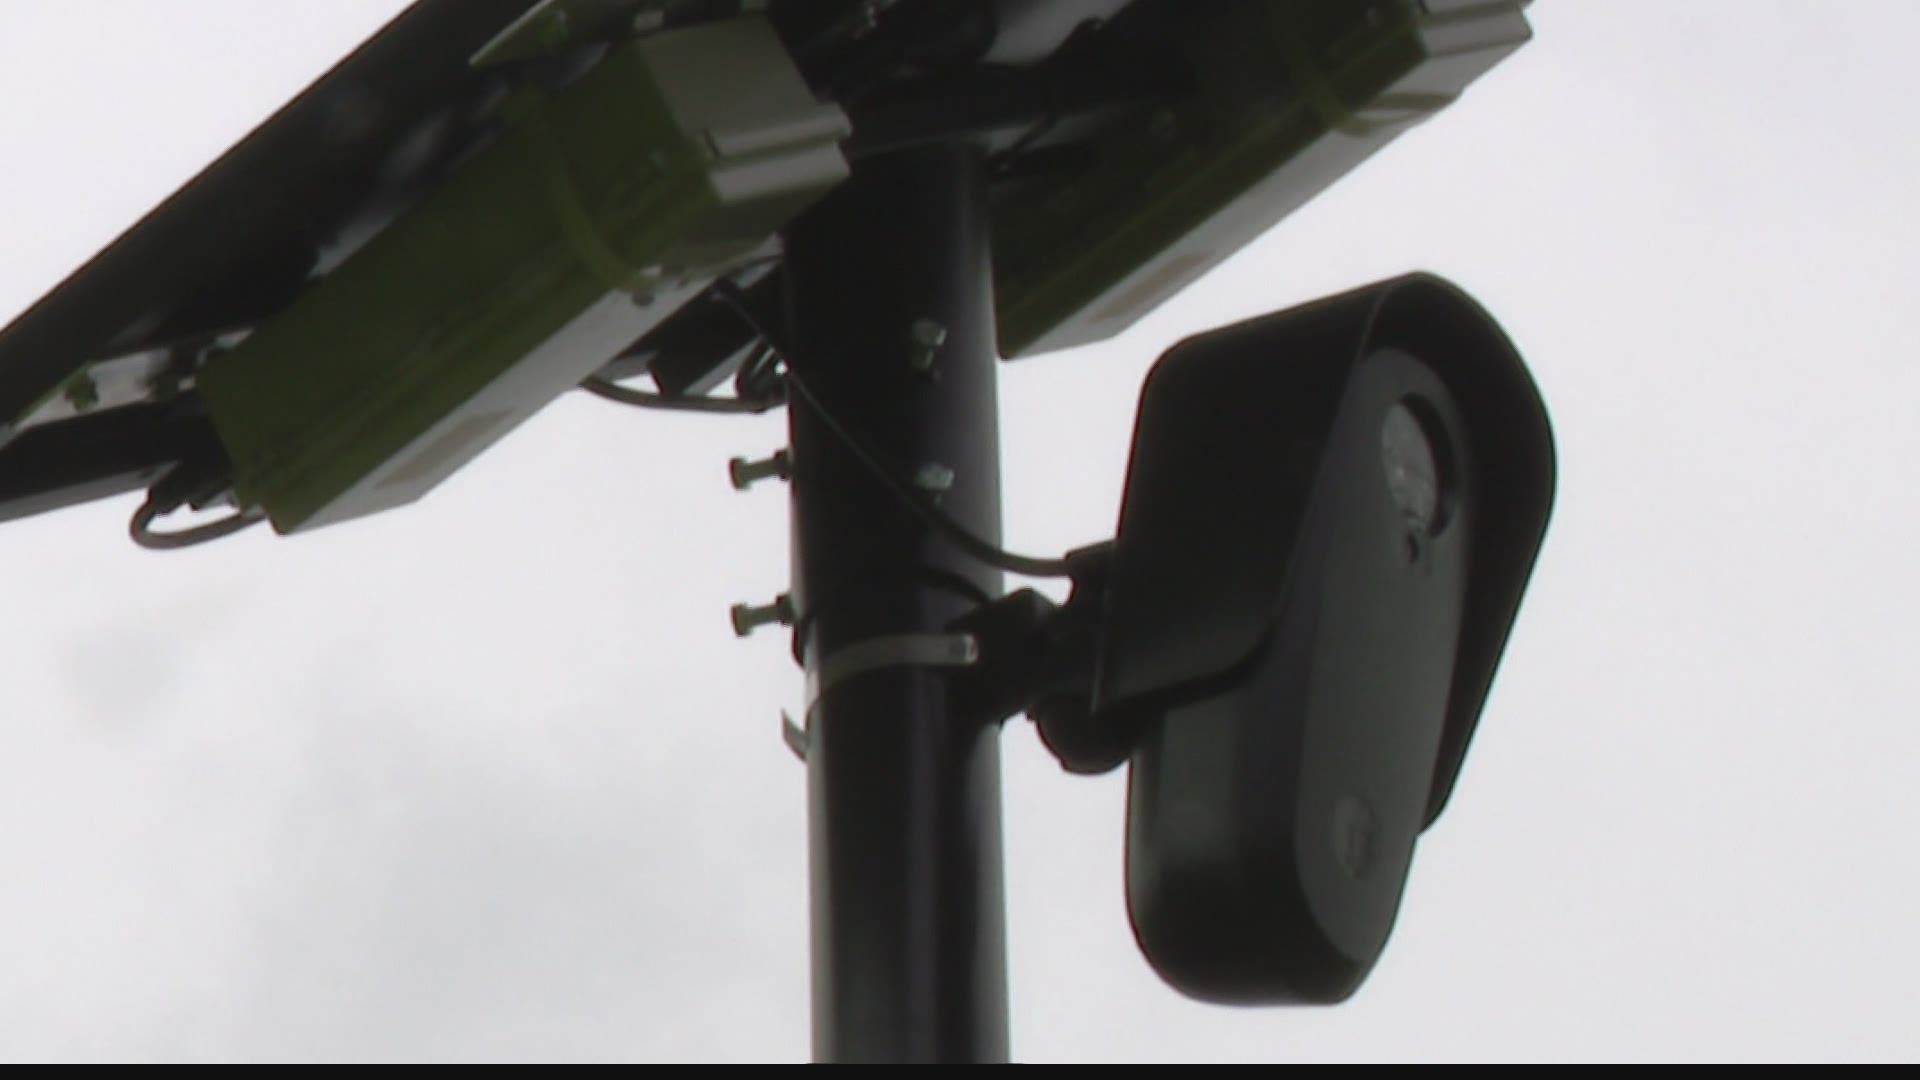 Hancock County Sheriff Brad Burkhart said the cameras aren't "Big Brother," but they can help deputies identify cars that may have been involved in crimes.